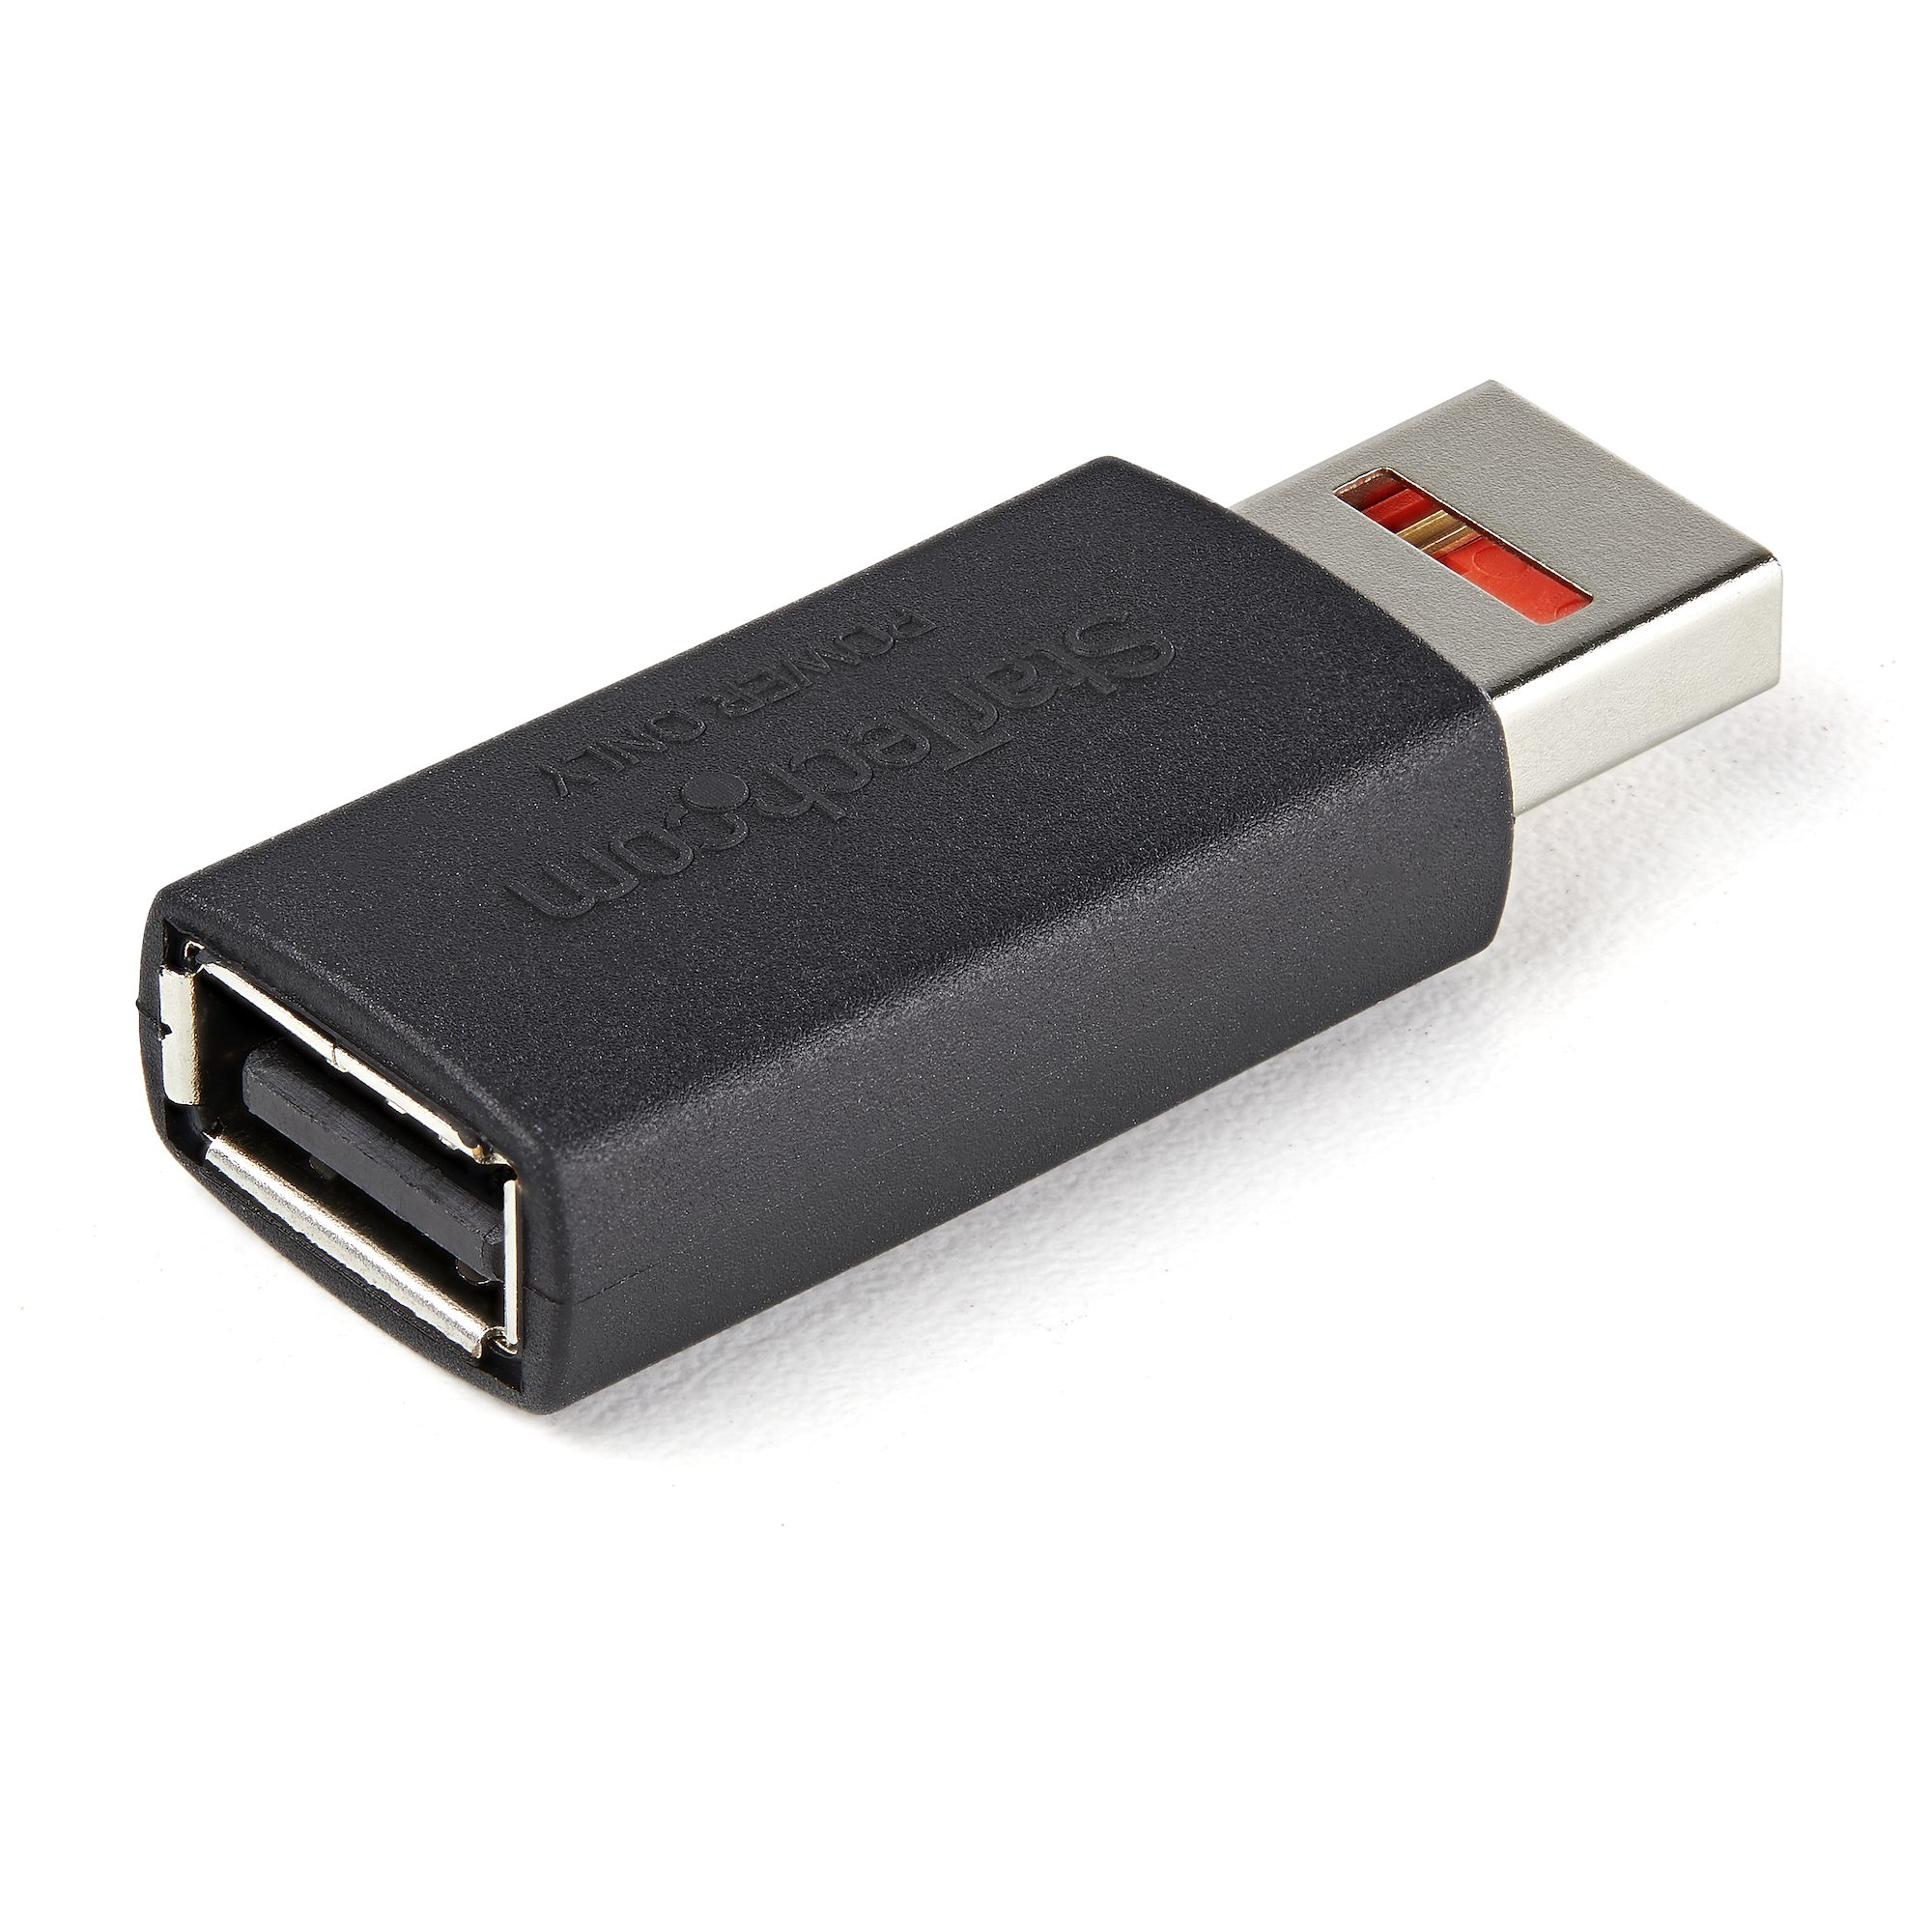 StarTech.com Secure Charging USB Data Blocker Adapter  Male to Female USB-A Charge-Only Adapter  No-Data Charge/Power-Only Adapter for Phone/Tablet  Data Blocking USB Protector Adapter